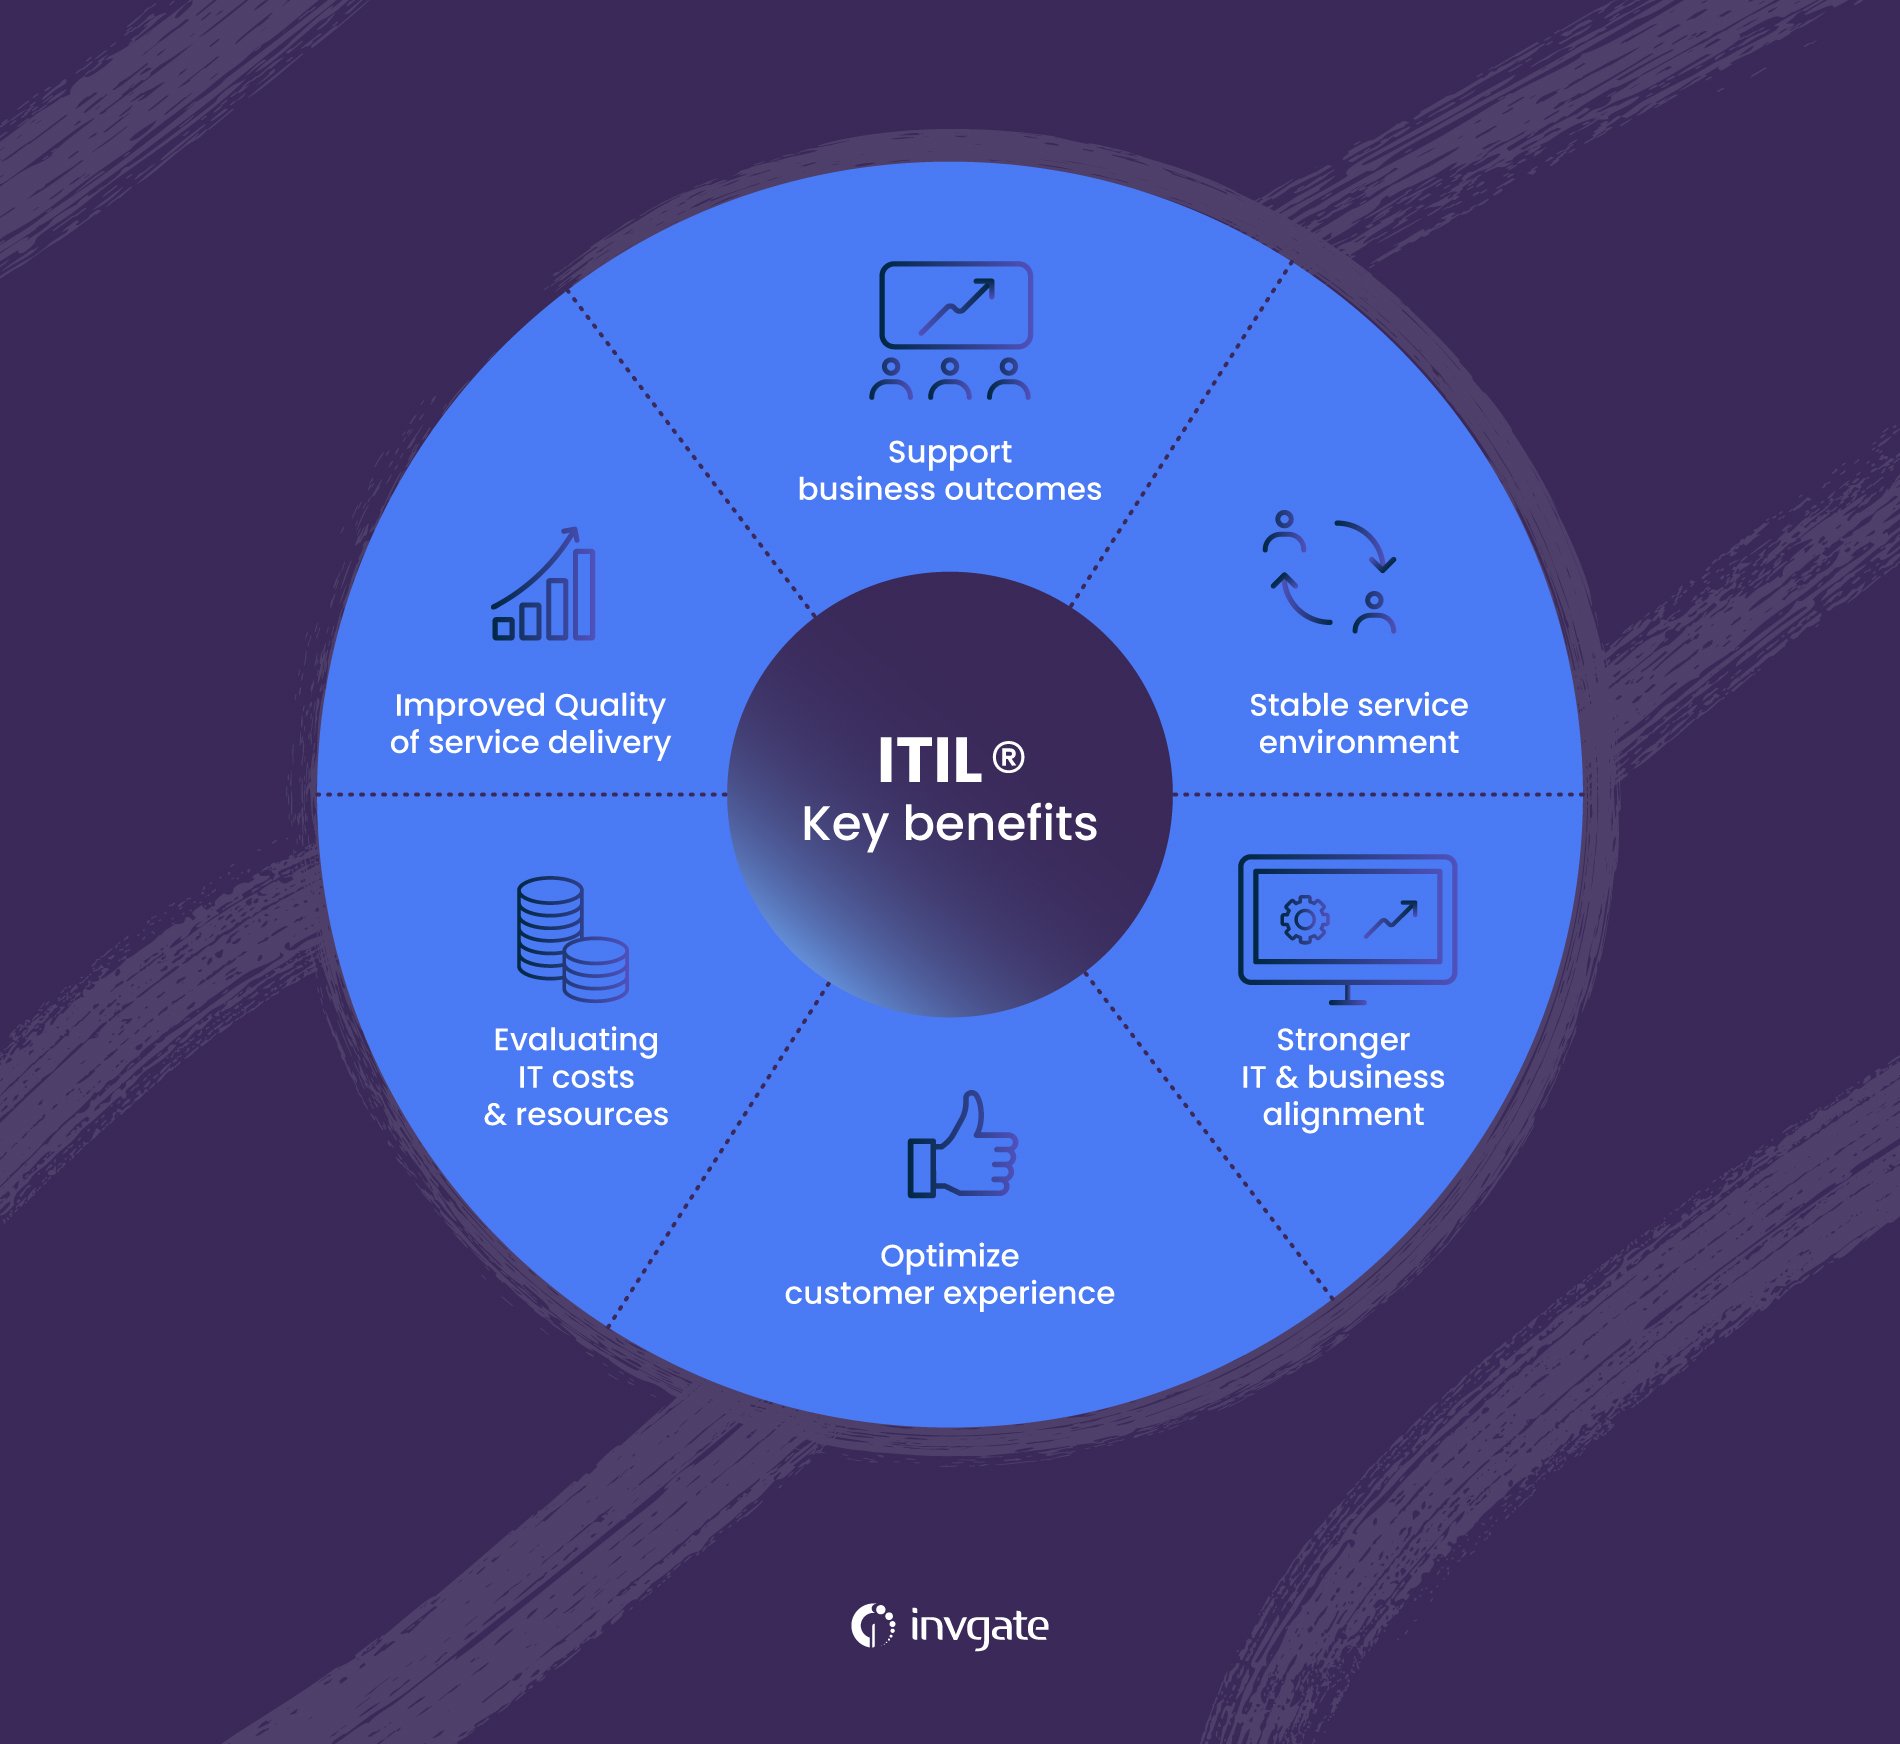 The key benefits of ITIL